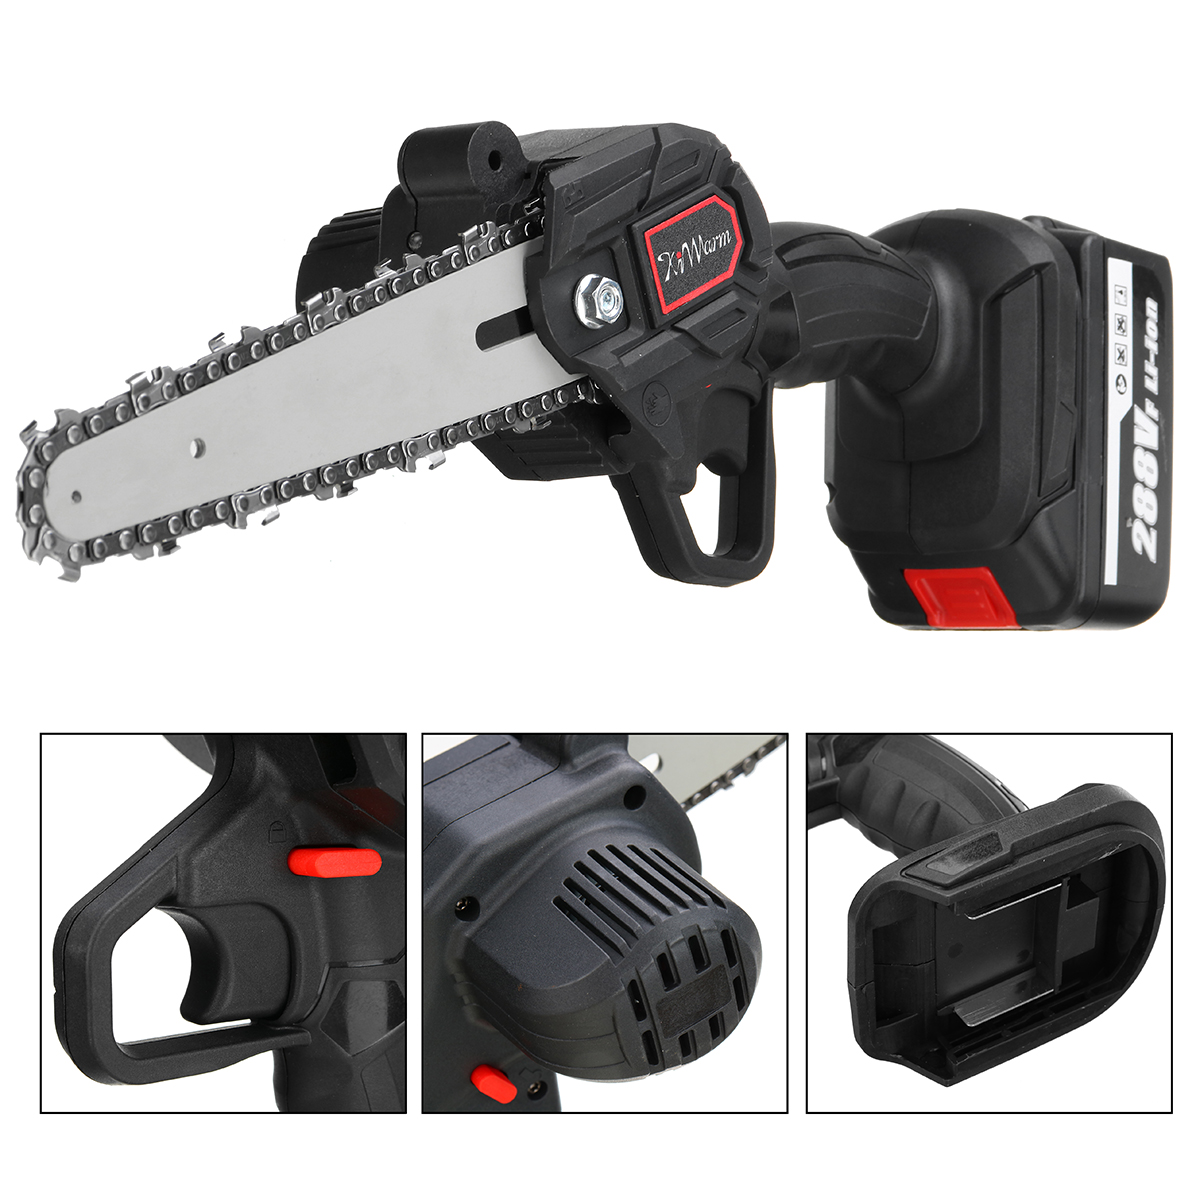 6-Inch-Portable-Electric-Pruning-Chain-Saw-Rechargeable-Small-Woodworking-Wood-Cutter-W-1-or-2-Batte-1878485-11